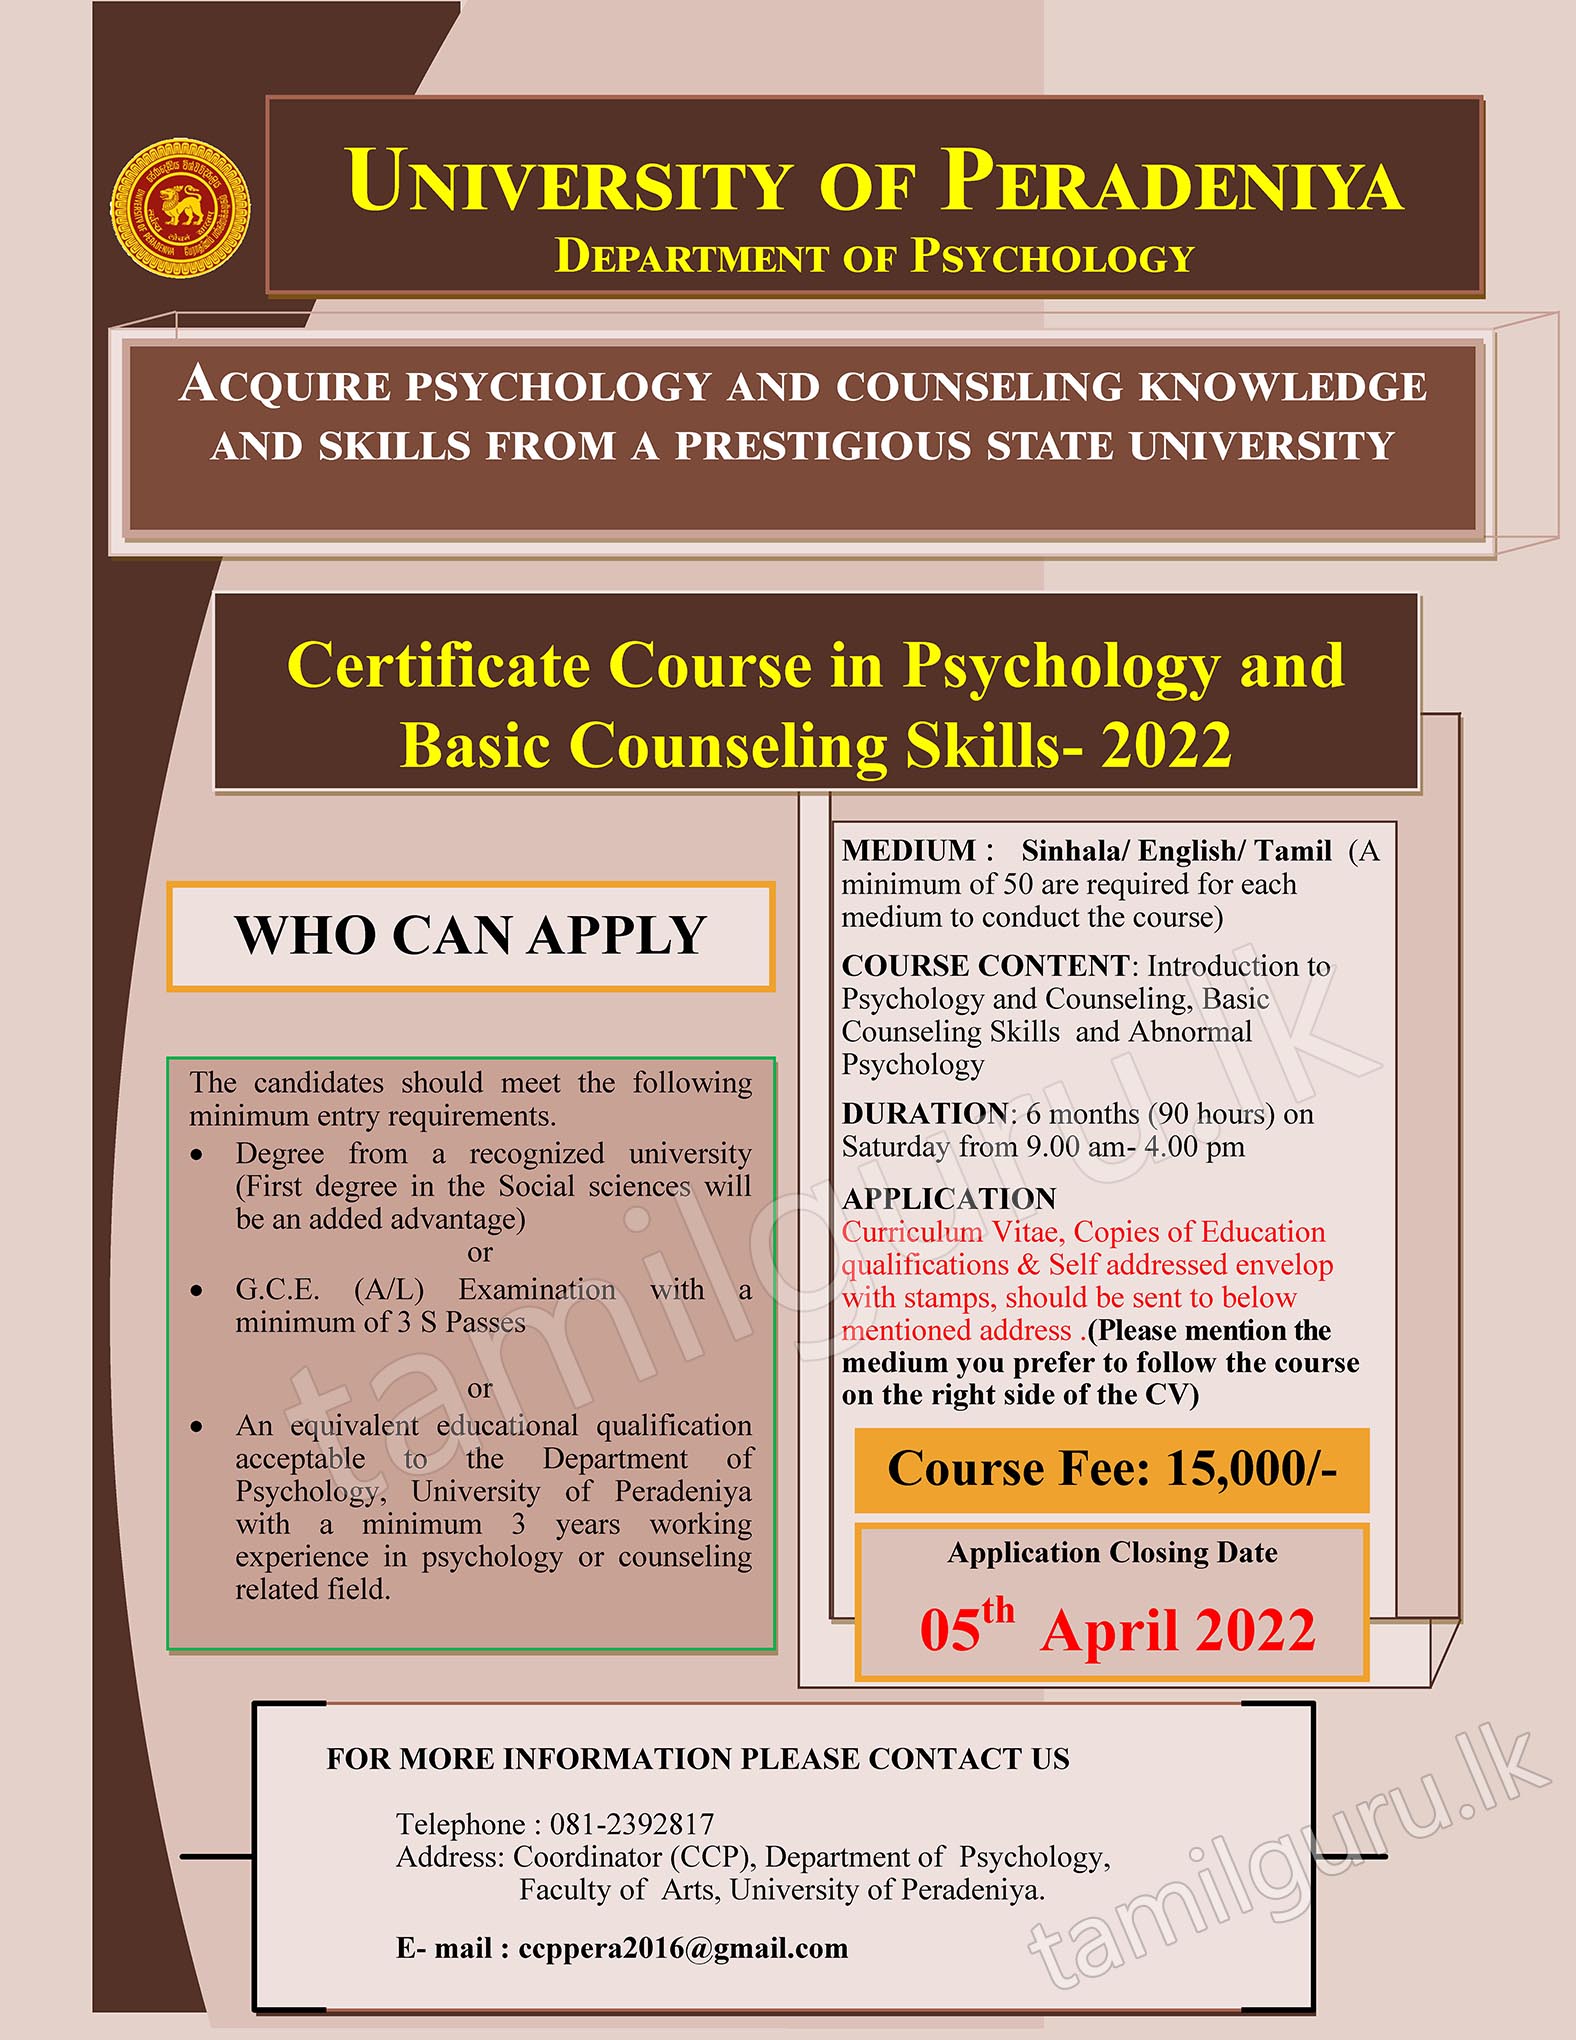 Calling Applications for Certificate Course in Psychology and Basic Counseling Skills (2022) Conducted by the Department of Psychology, Faculty of Arts, University of Peradeniya